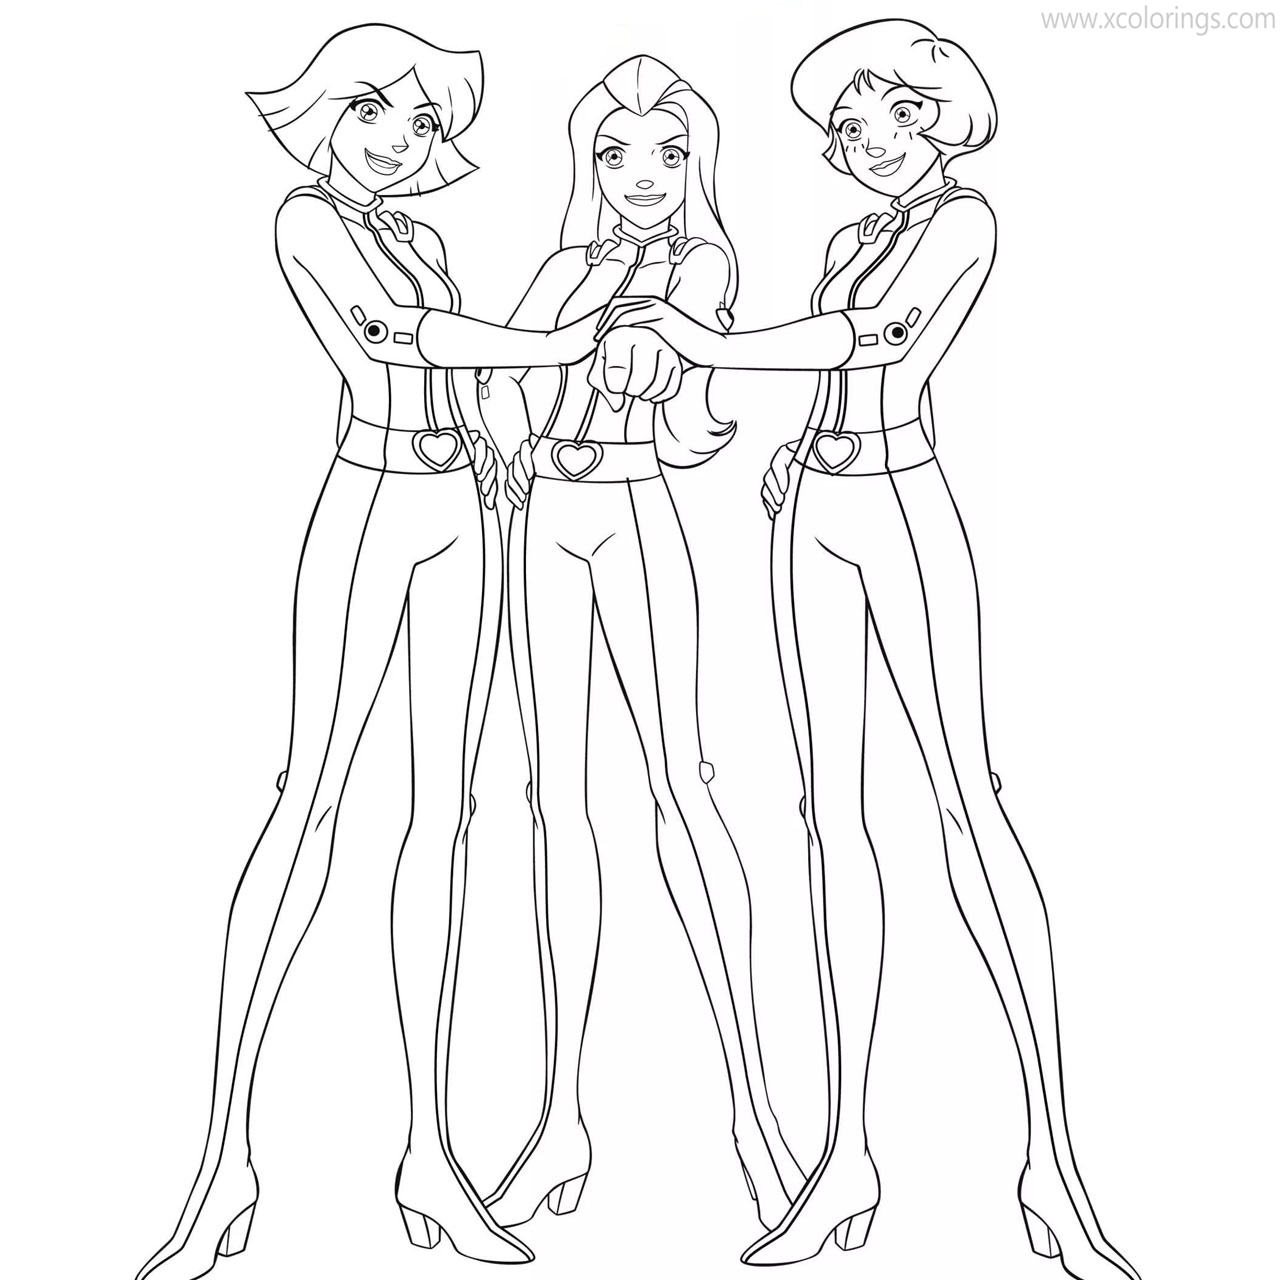 Free Totally Spies Coloring Pages Girls printable